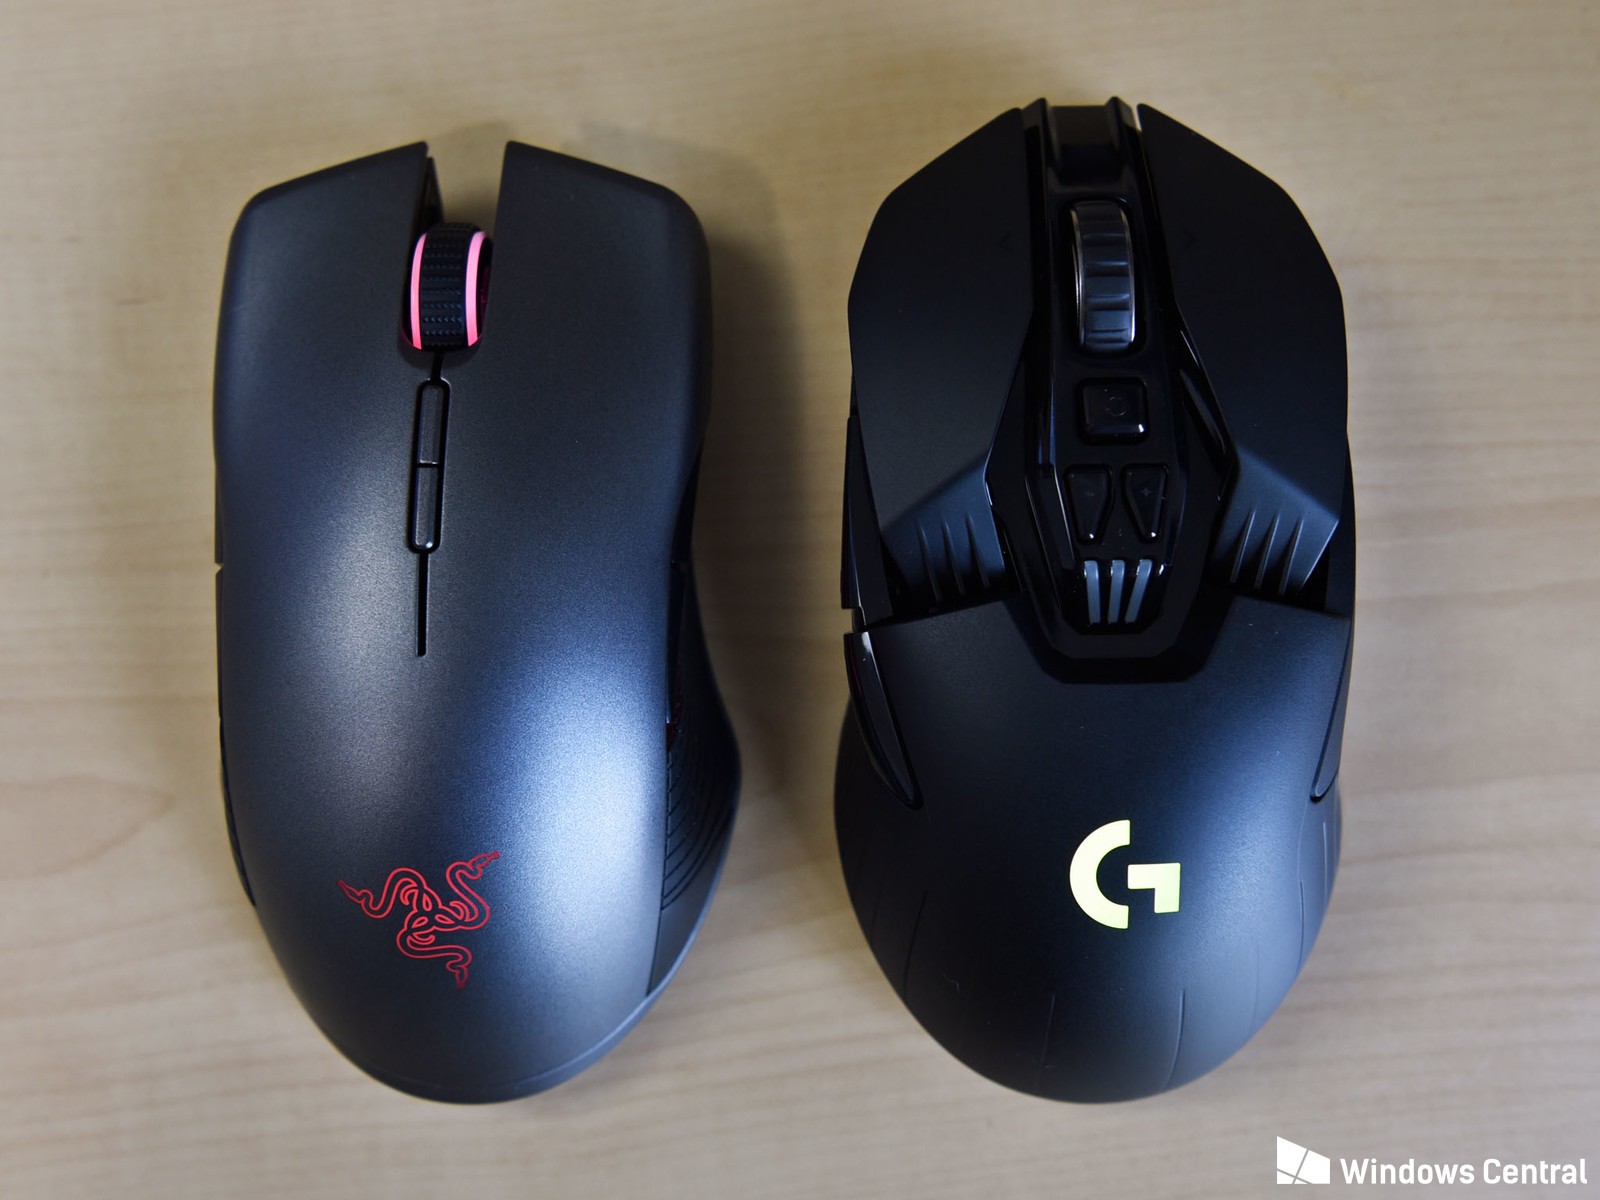 Clearing up misconceptions about laser and optical mice | Windows ...